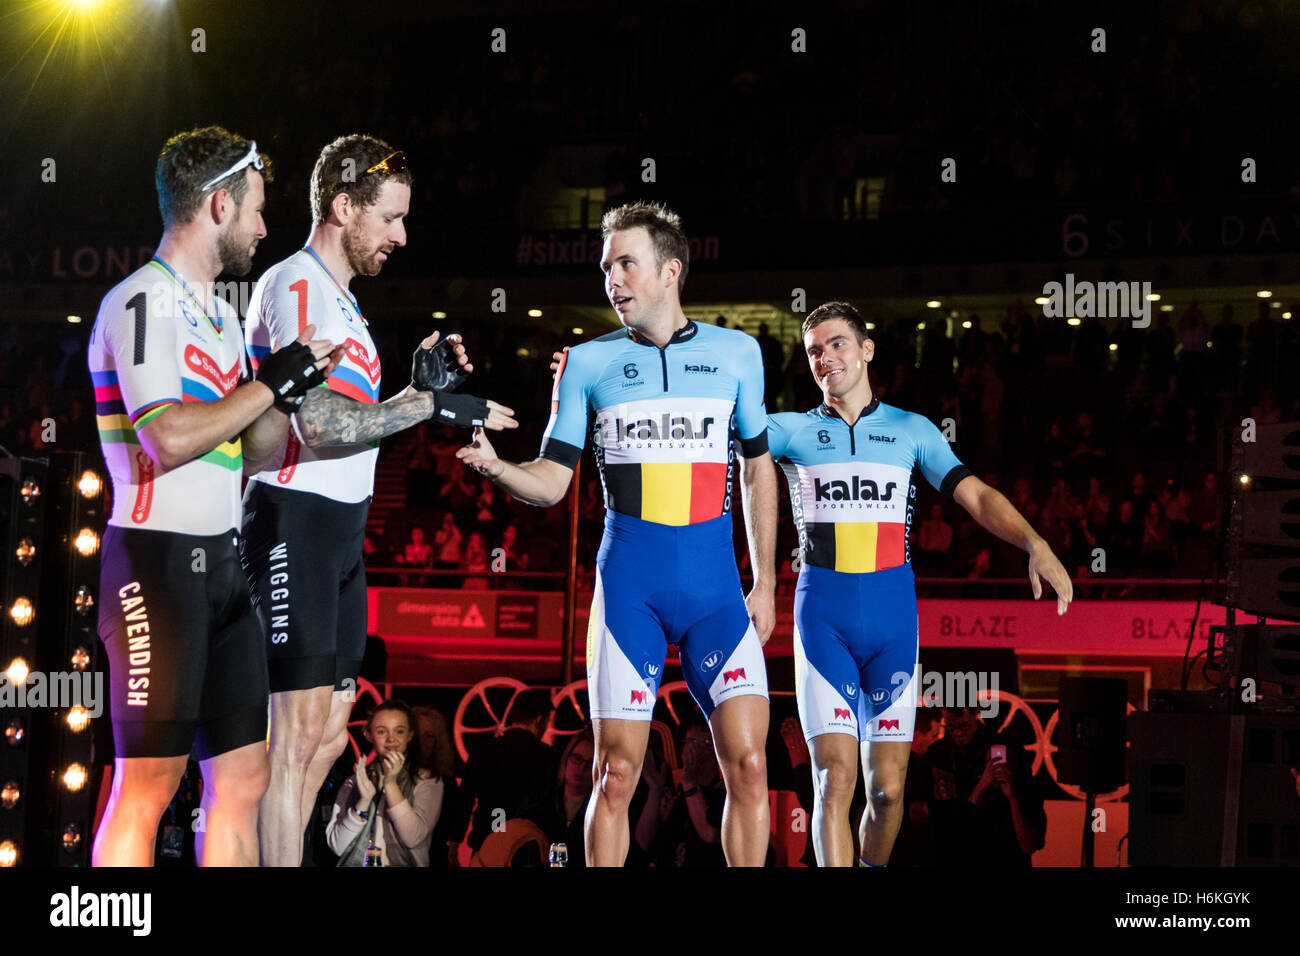 London, UK  30th October, 2016.   Cyclists compete  in the final day of  the London Six Day cycling event.  Bradley Wiggins and Mark Cavendish finish second and De Ketele and De Pauw win the event overall.  Lee Valley Velodrome, Olympic Park, London, UK. Copyright Carol Moir/Alamy Live News. Stock Photo